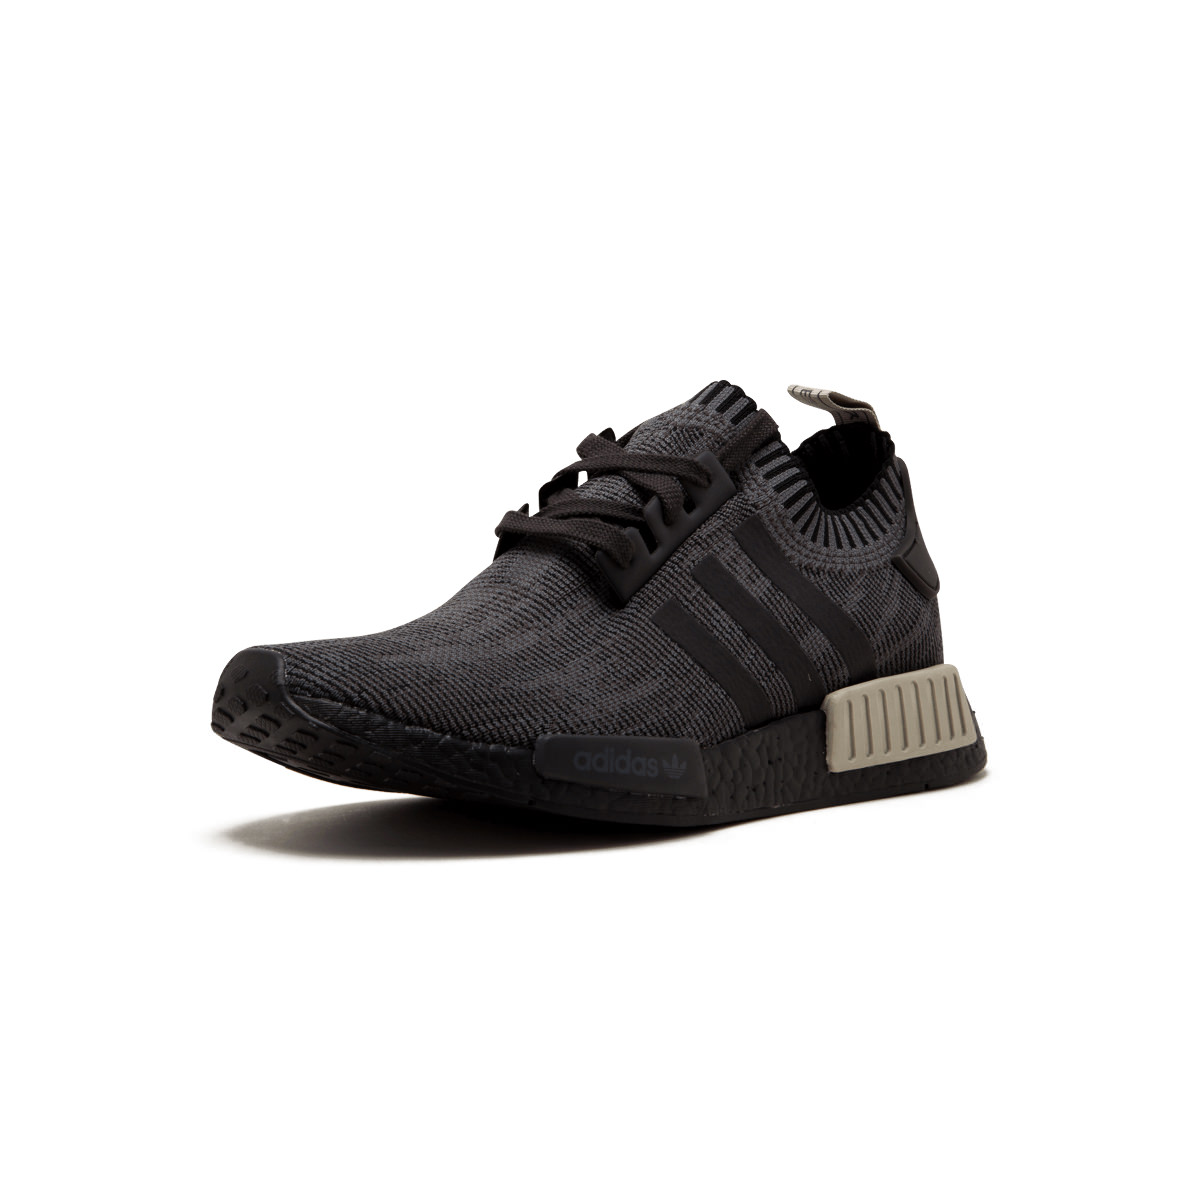 uitzondering Bowling hebzuchtig adidas NMD R1 Primeknit Black Oliveadidas NMD R1 Primeknit Black Olive -  OFour